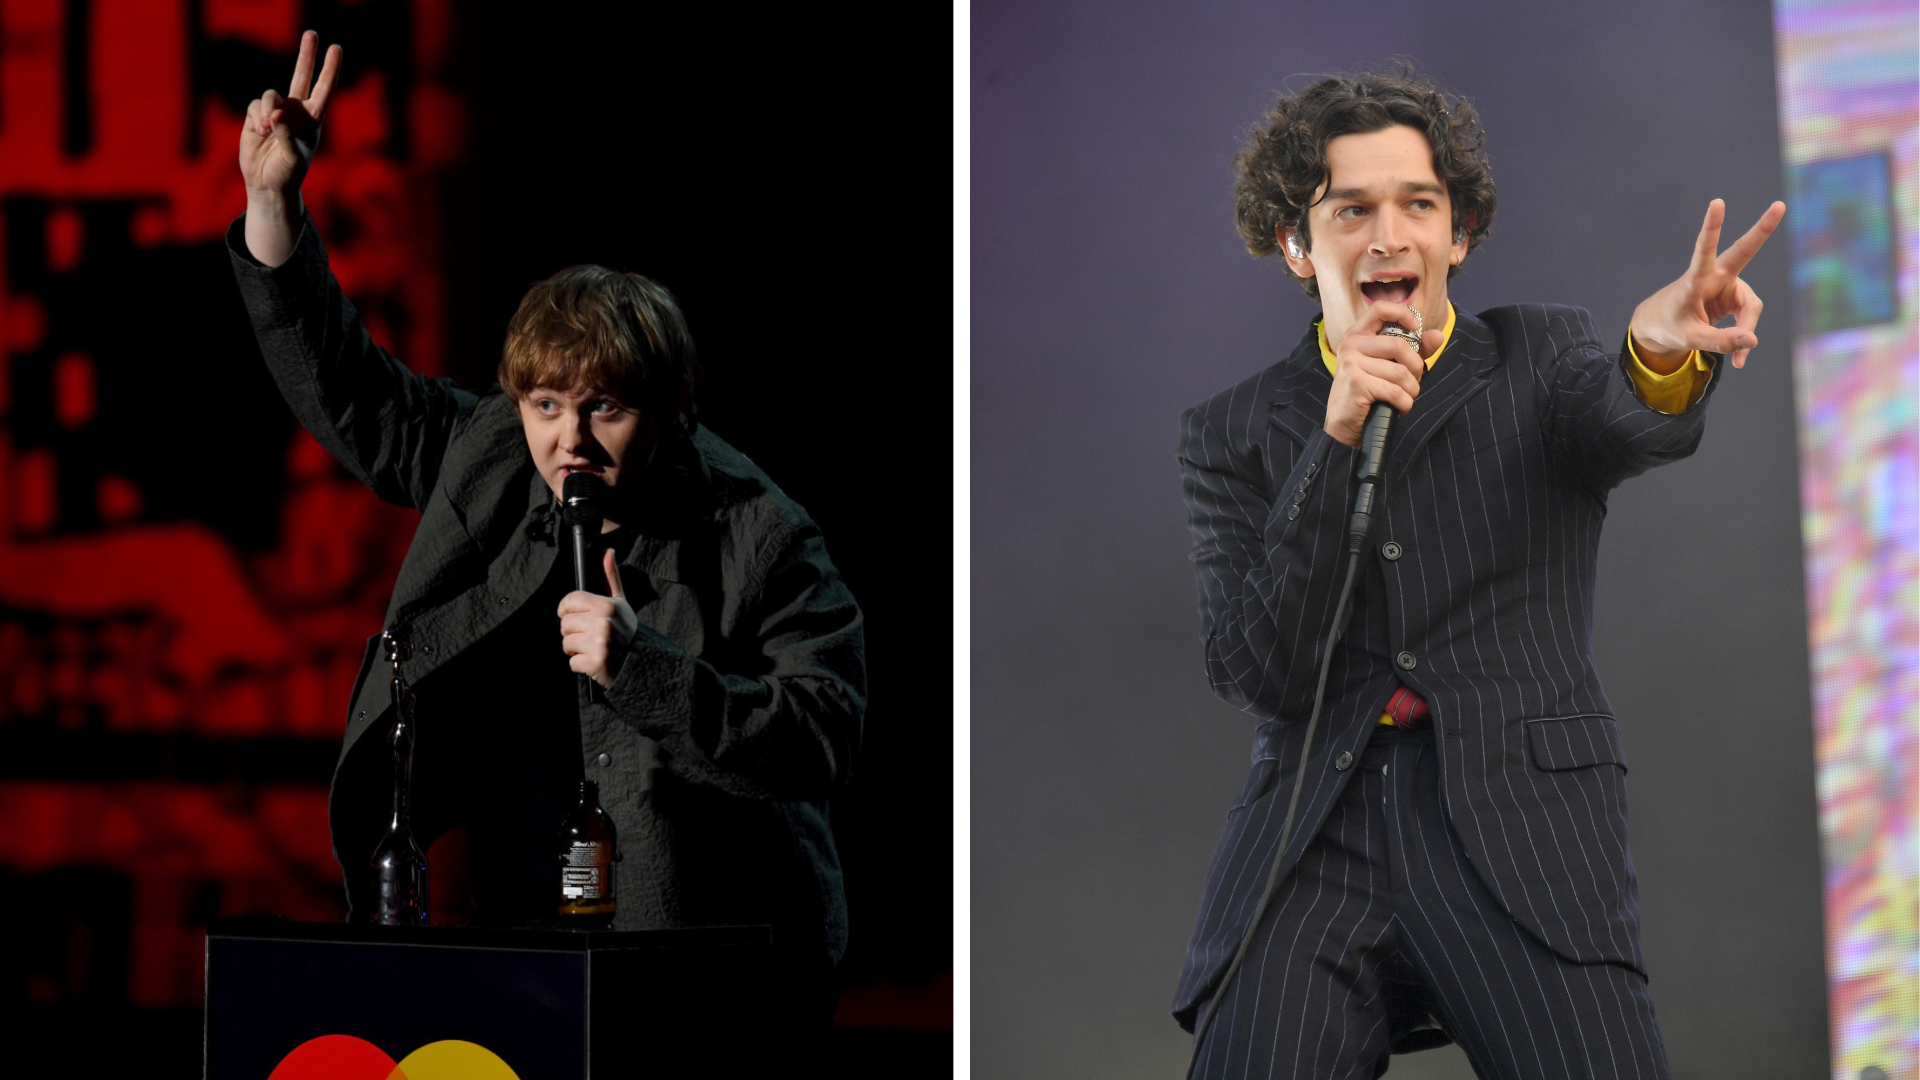 Lewis Capaldi and The 1975 will play at Radio 1's Big Weekend in Dundee